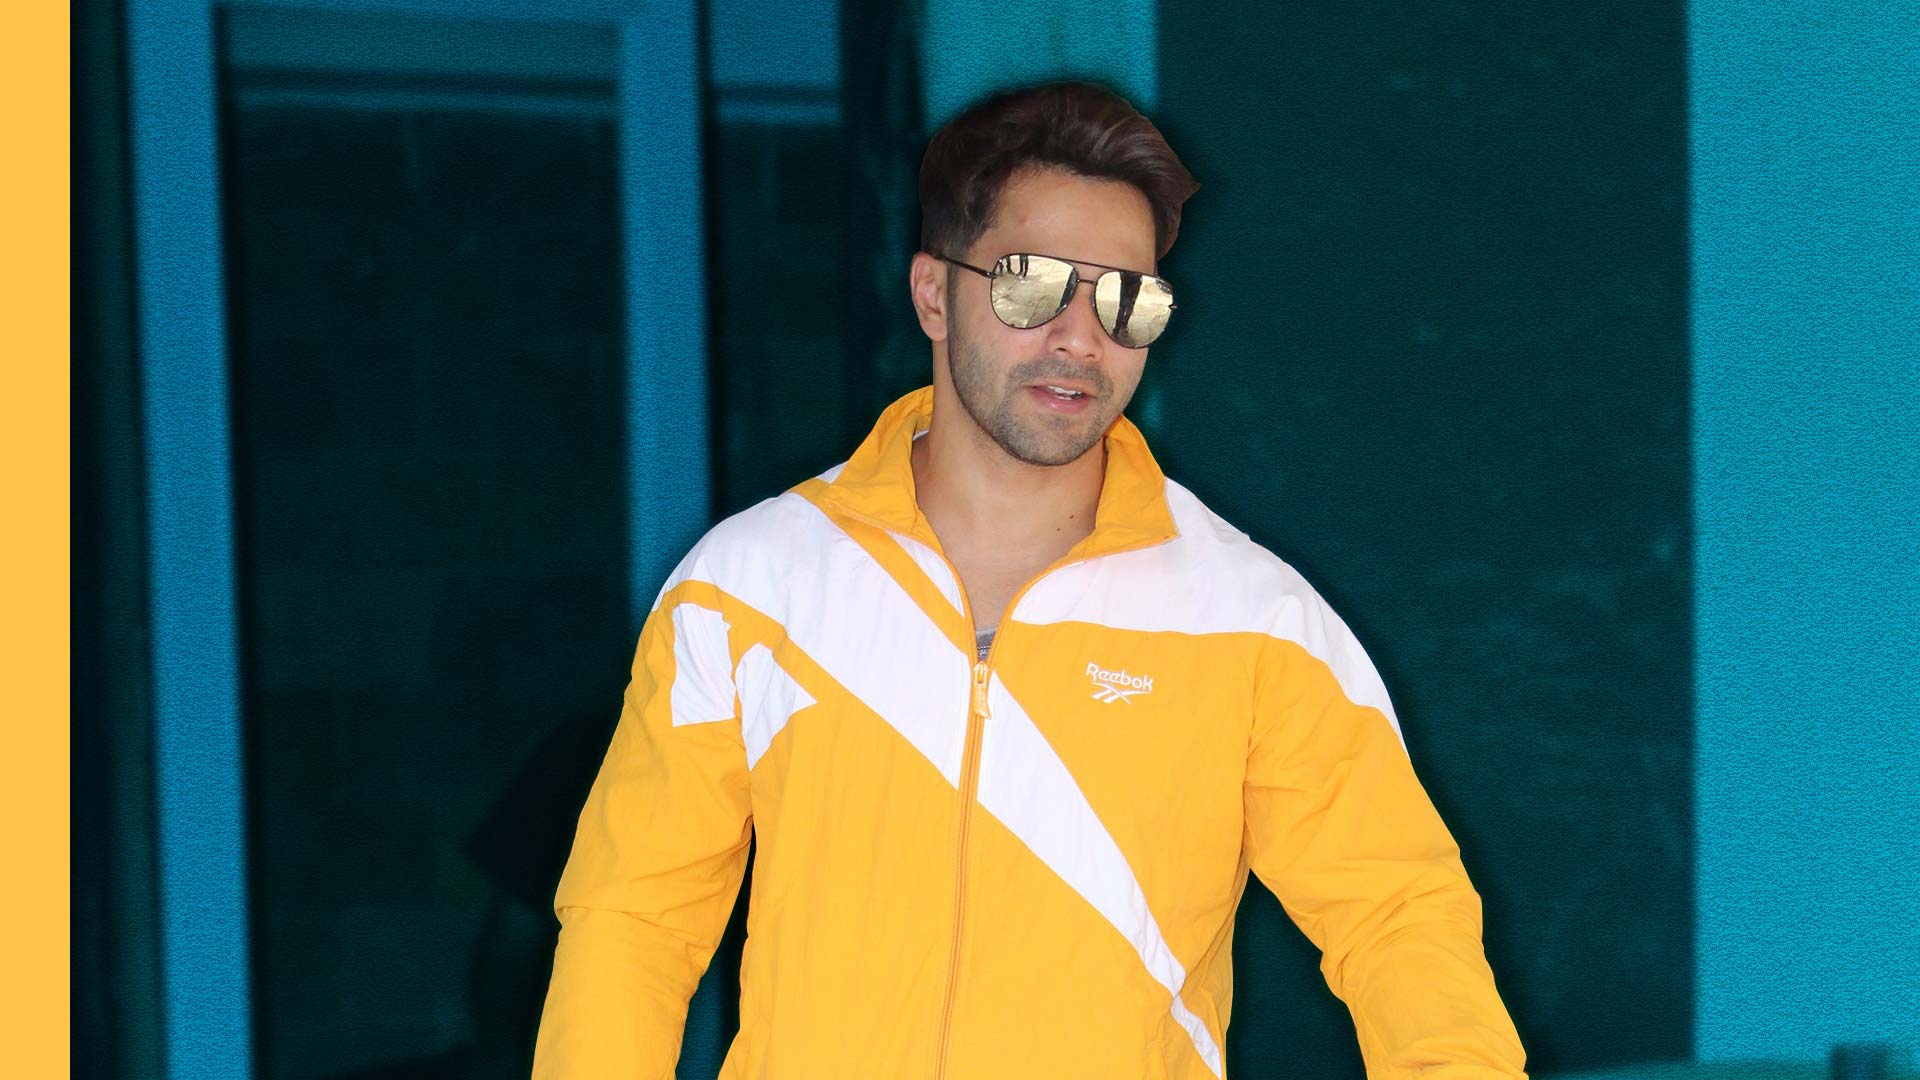 Varun Dhawan wore the coolest sunglasses to the gym this week